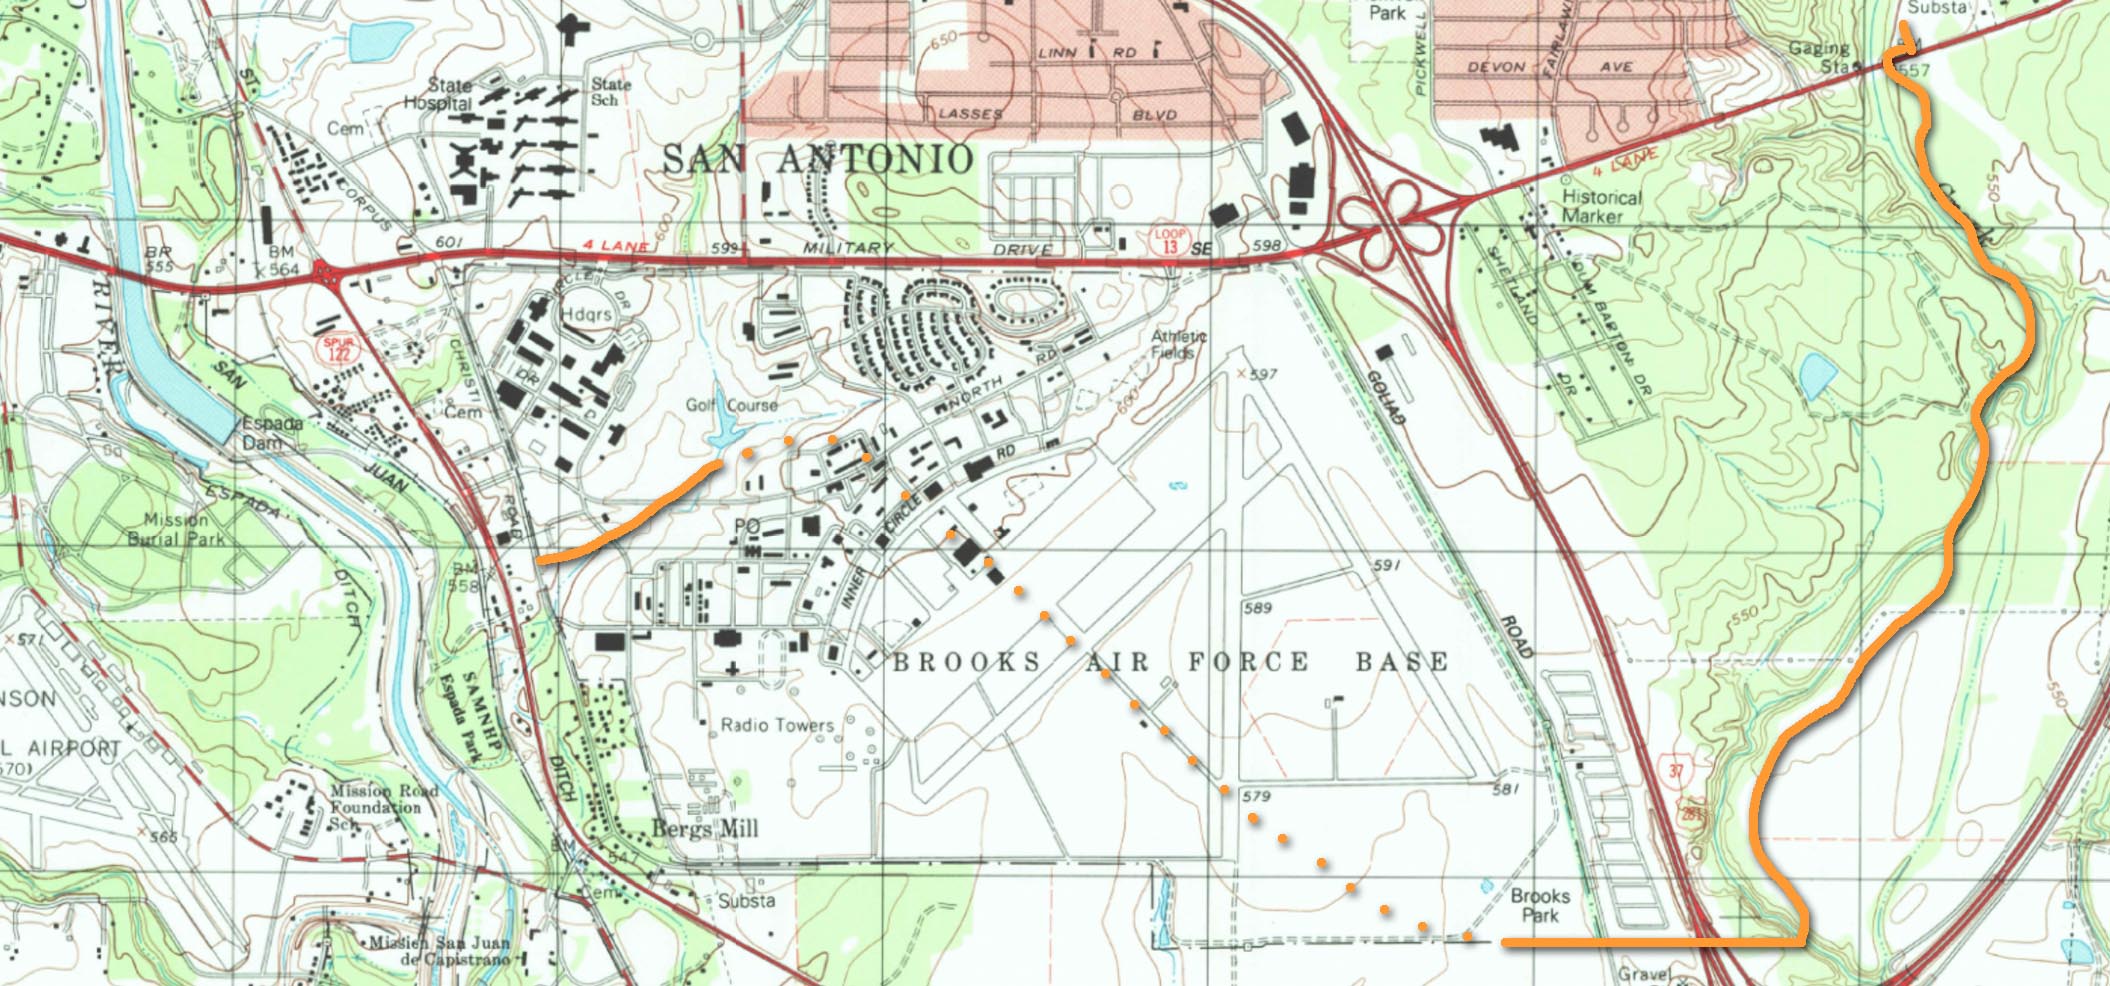 Conceptualized route across grounds once occupied by an air force and how it could be connected to the Mission Reach—Maps: USGS, Graphics: SRR